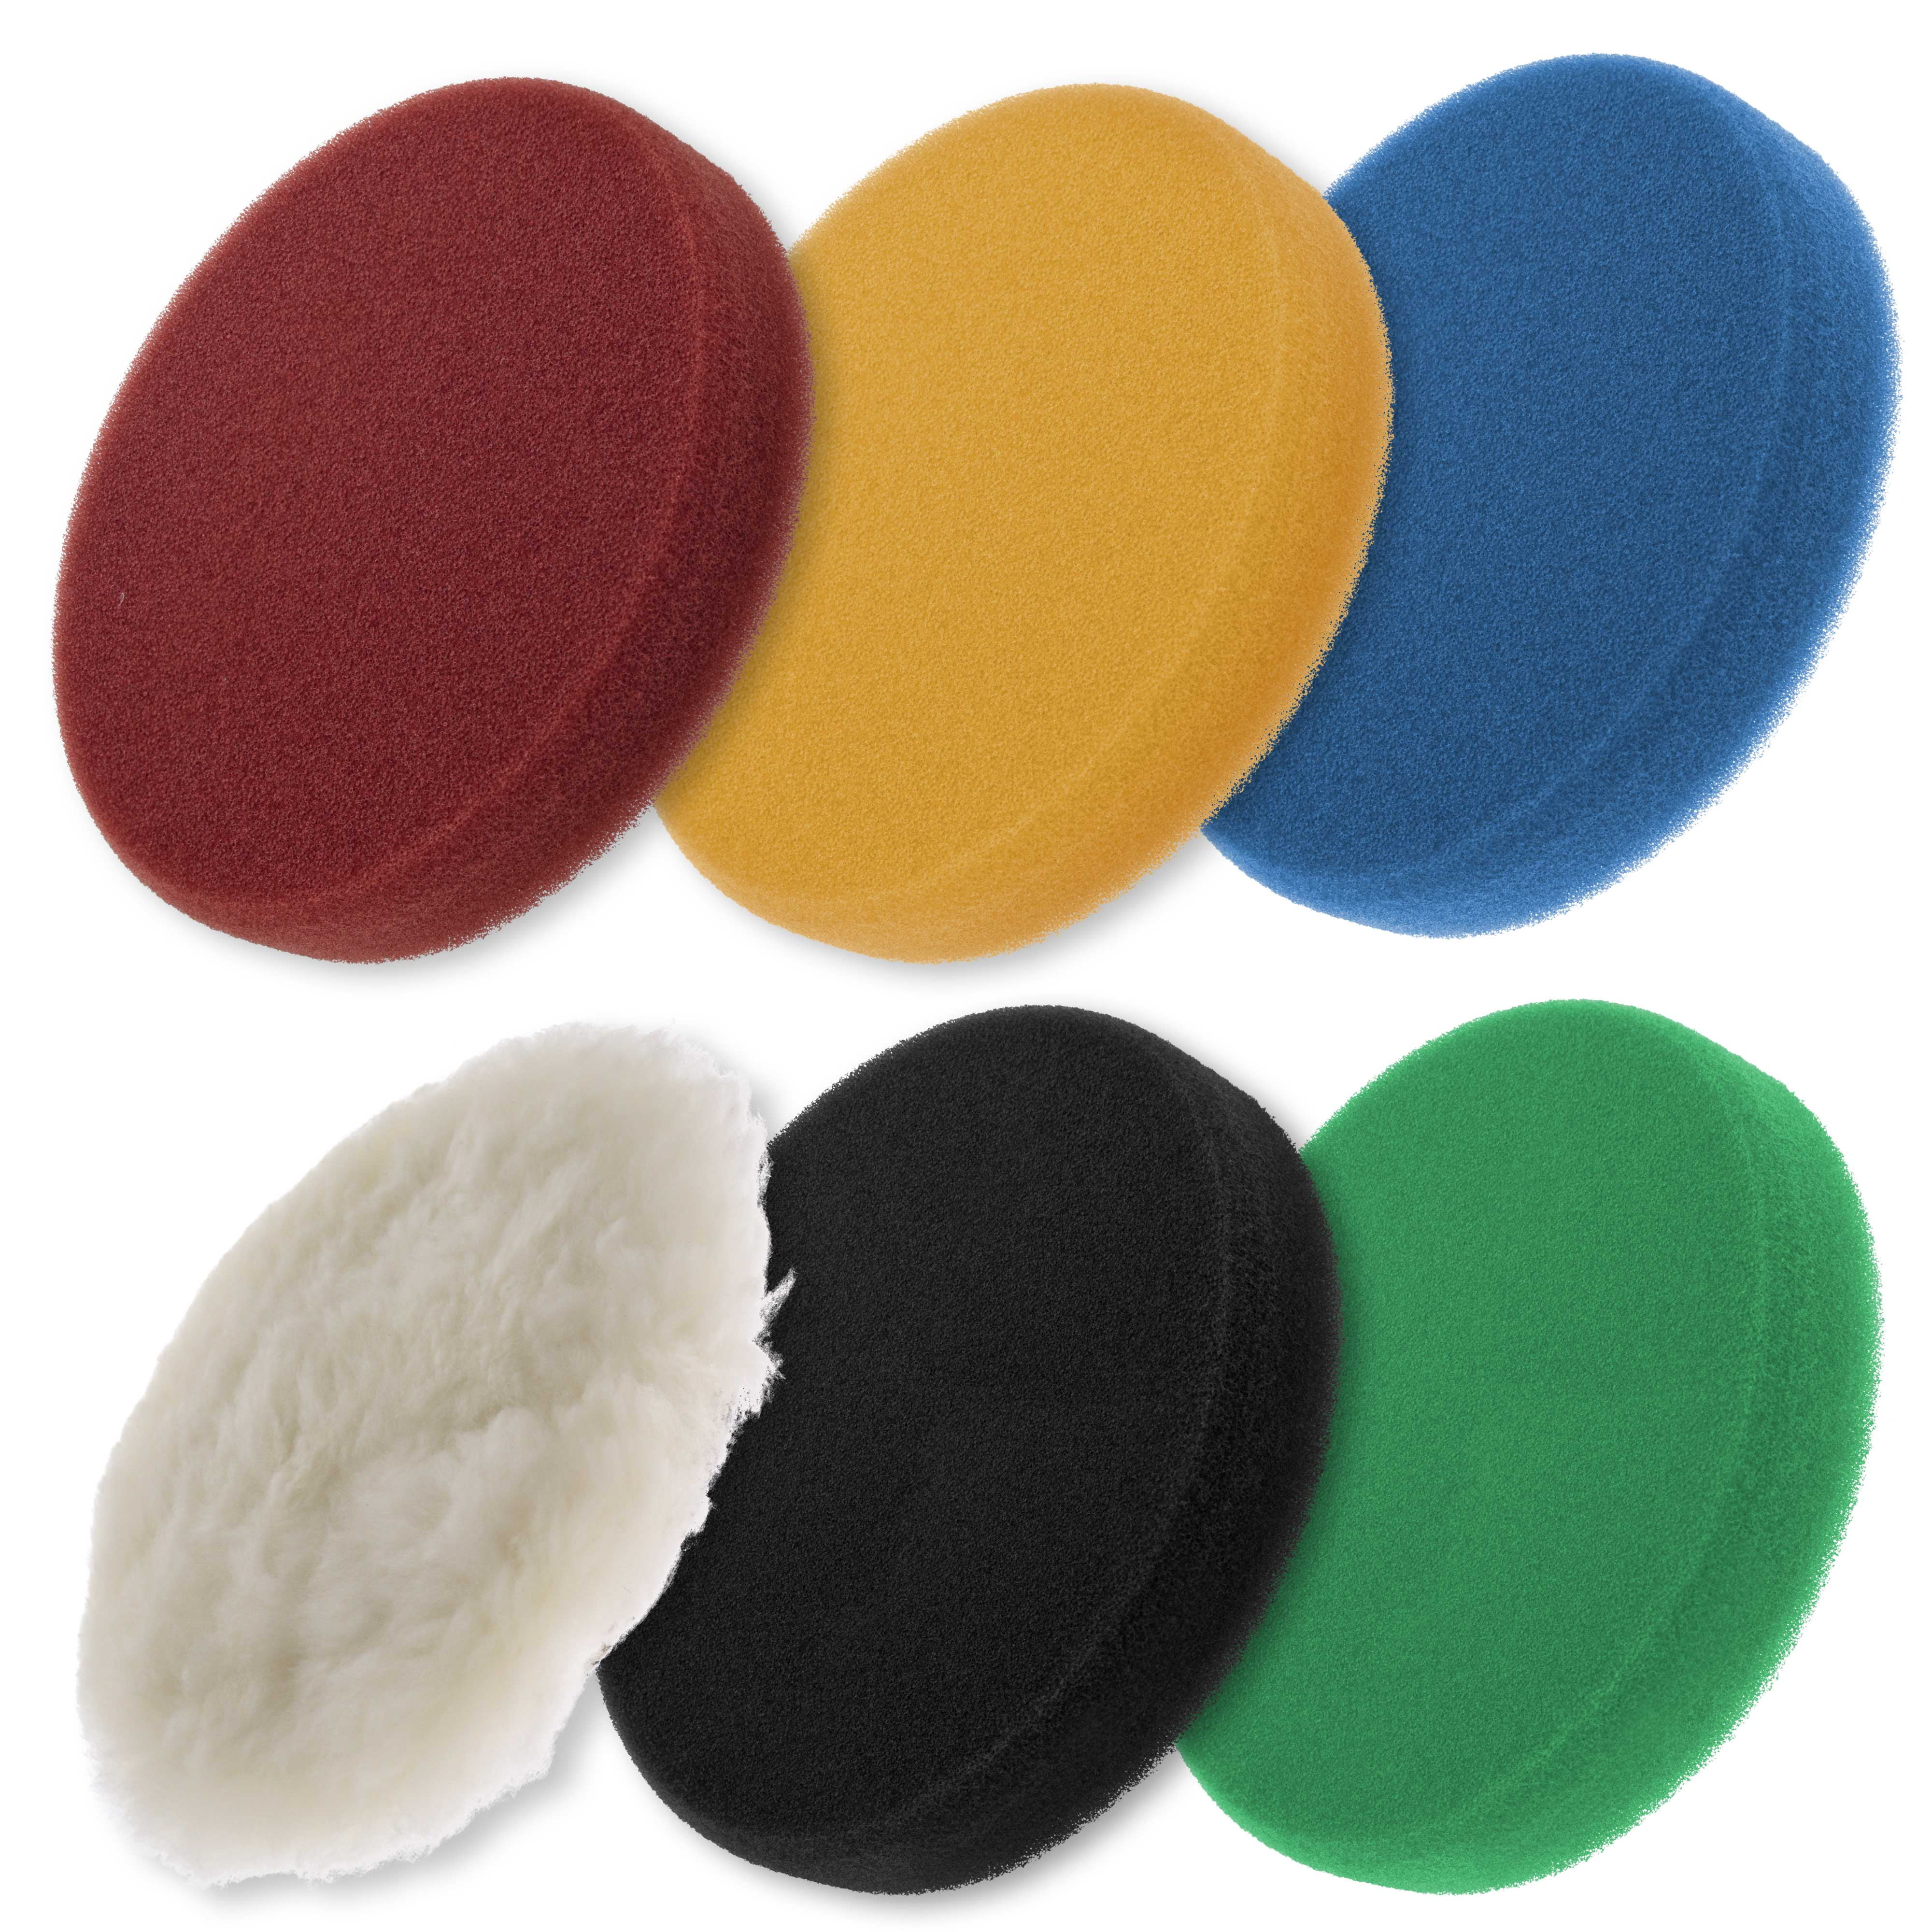 Car Wax Applicator Pads, Great Value Terry Cloth Applicator Pads - Pack 48  each